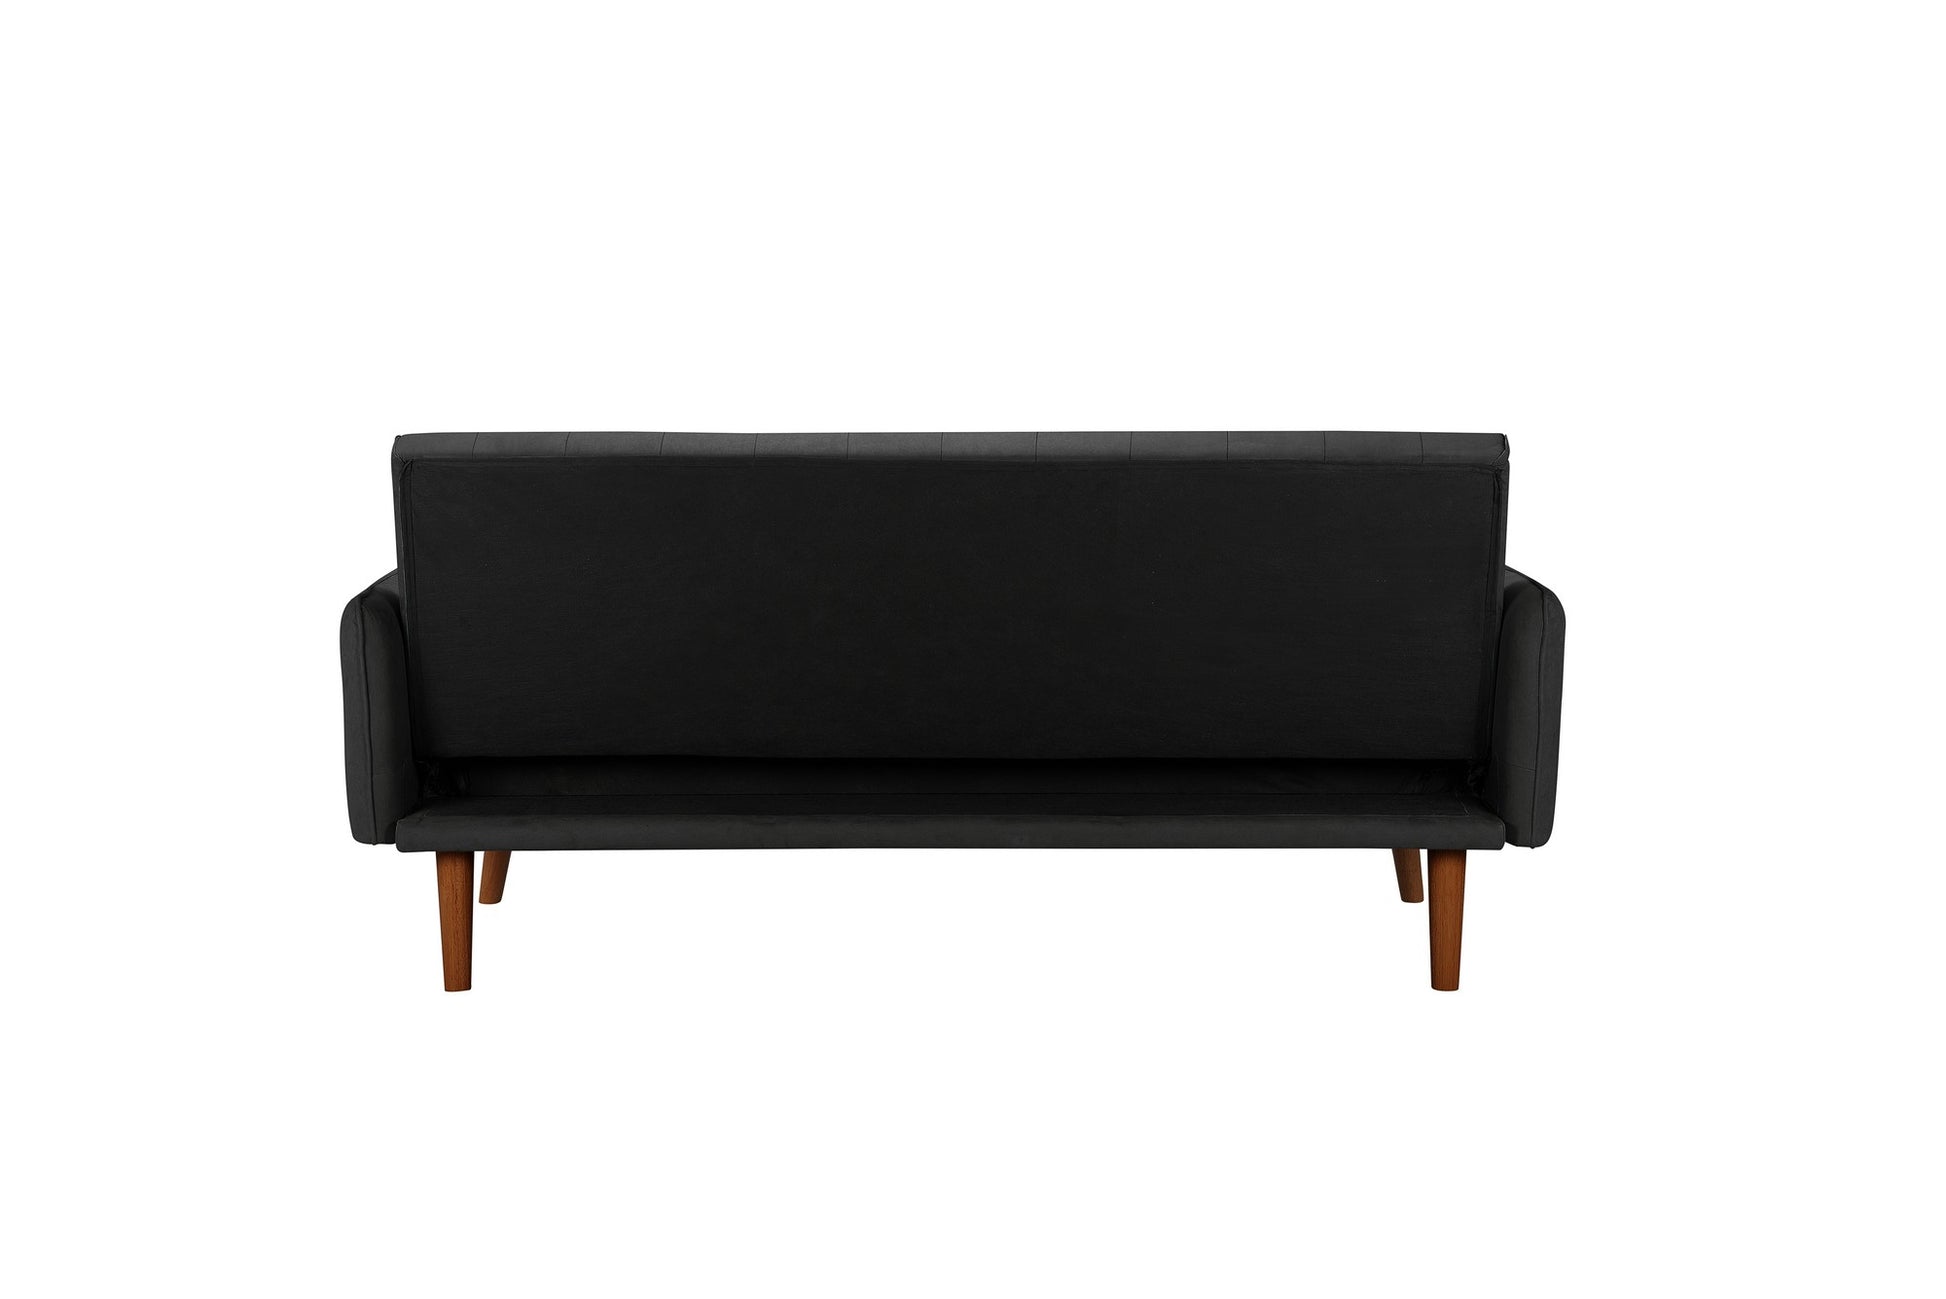 Modern Hudson Sofa Bed - Contemporary, Upholstered, Ideal for Occasional Guest Bed, Max Load 250kg